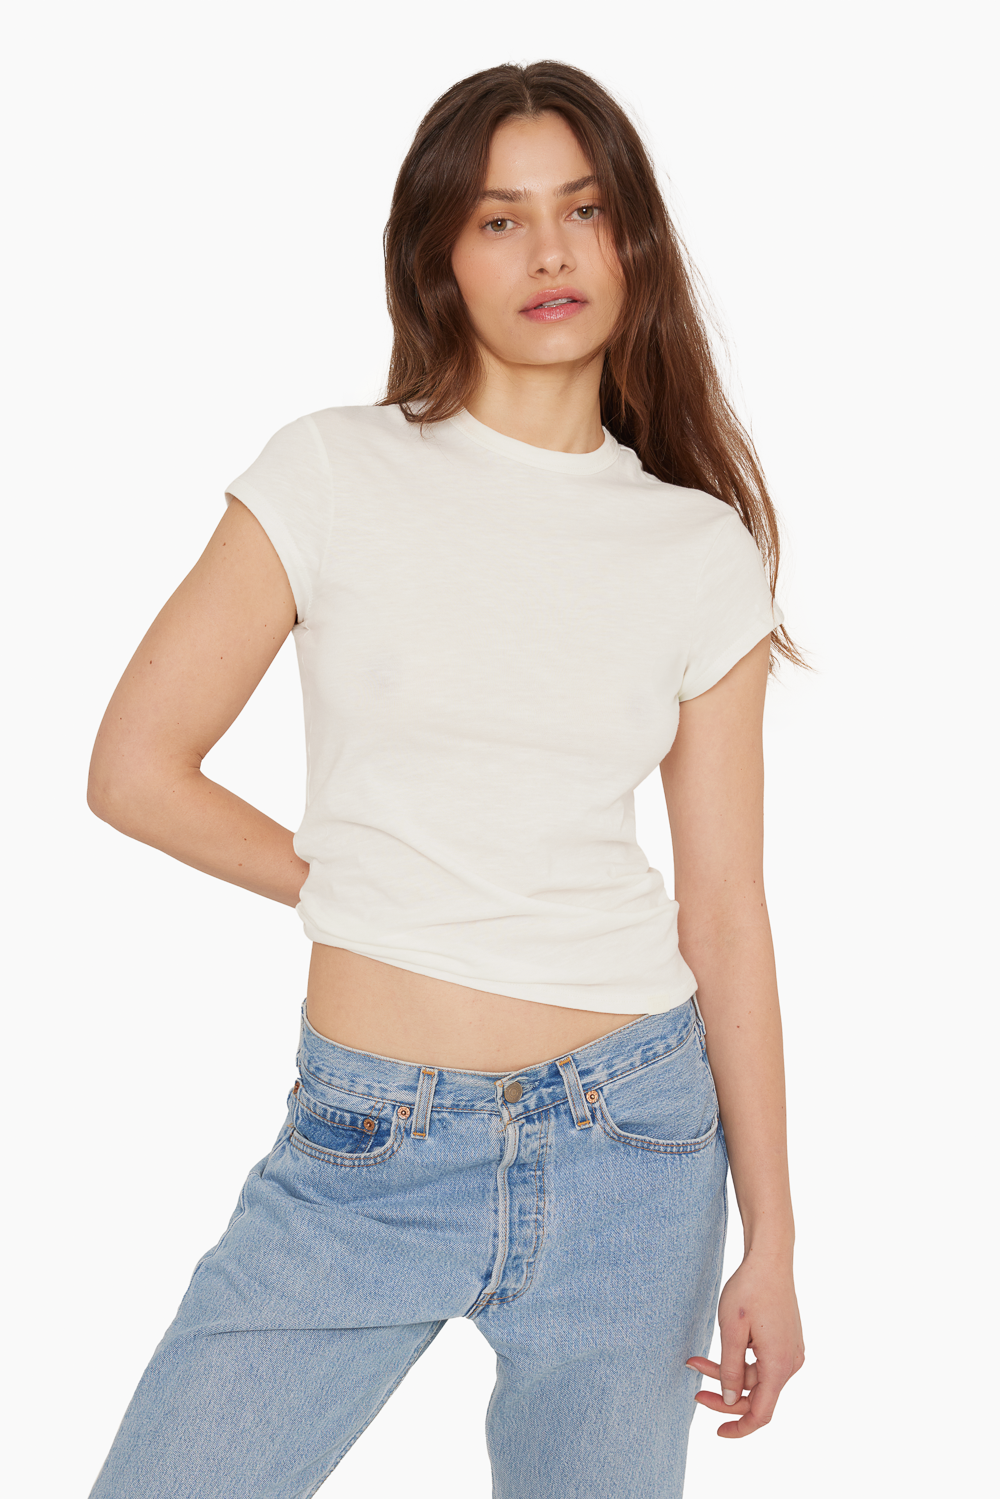 CLASSIC COTTON GIRLFRIEND TEE - BLANC Featured Image